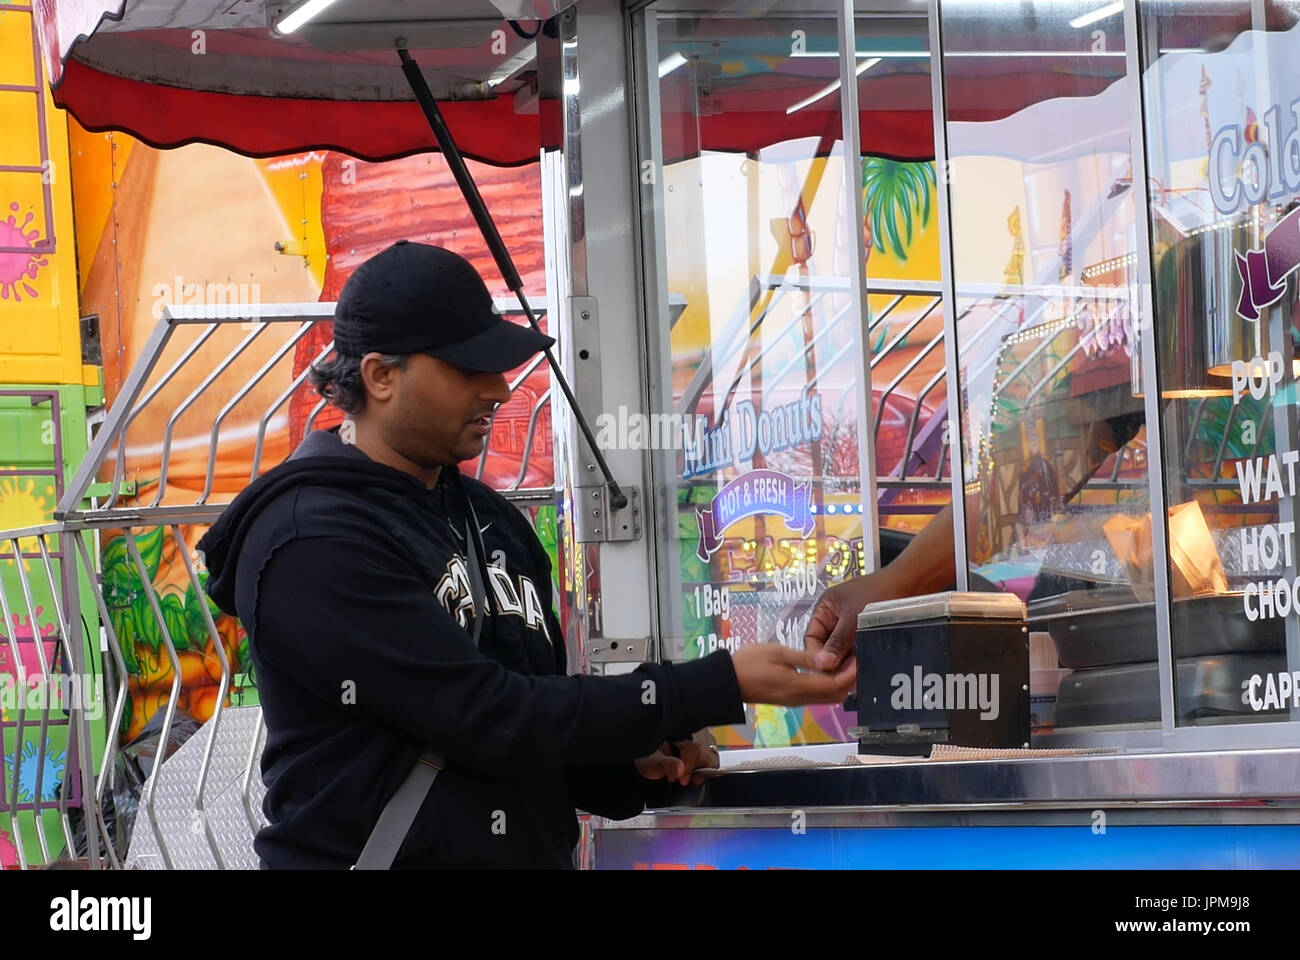 People buying donuts and paying cash at the West Coast Amusements Carnival Stock Photo